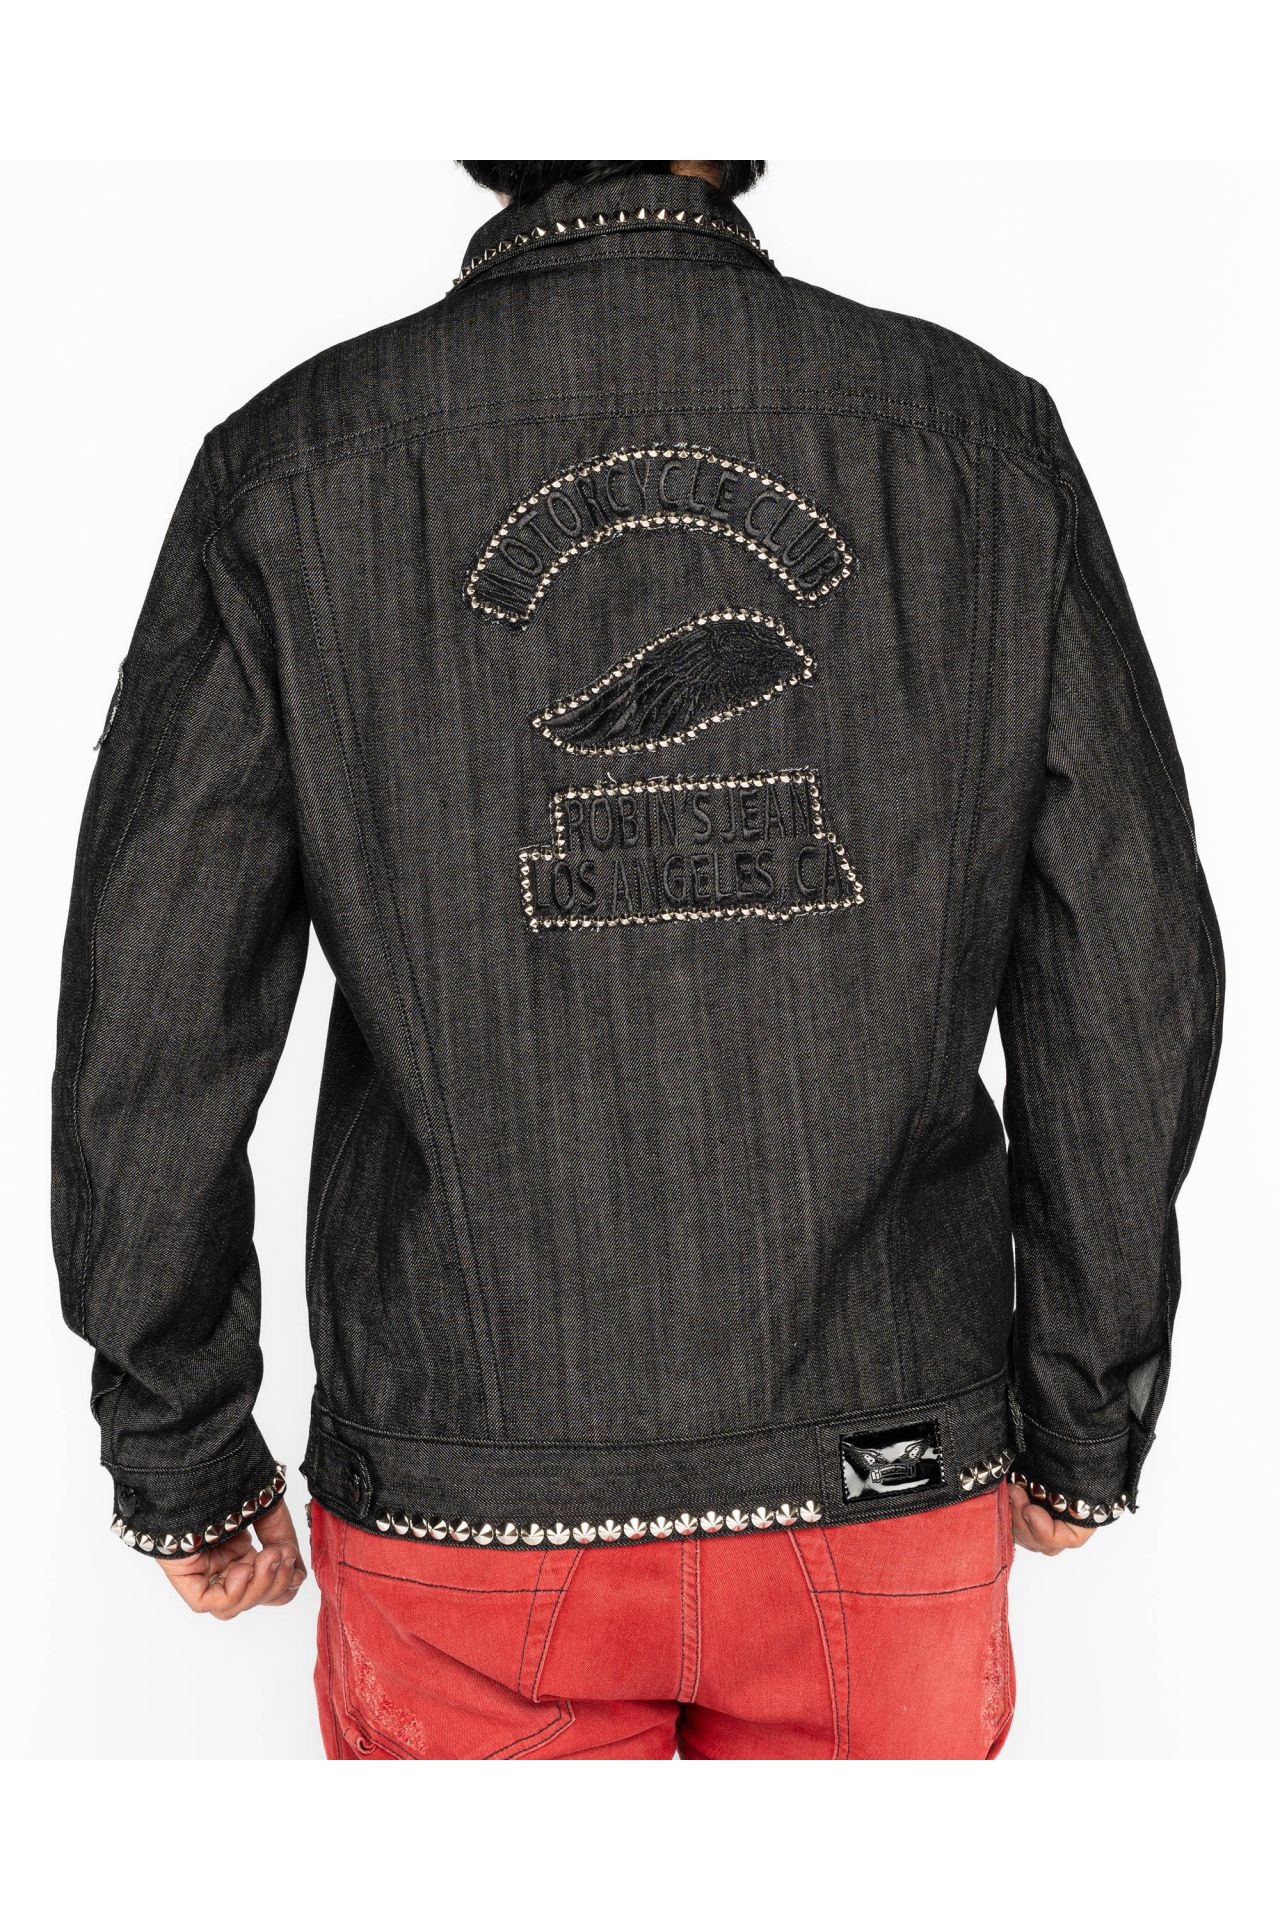 ROBINS RAW DENIM COLLECTION MENS JACKET IN RAW BLACK DENIM WITH PATCHES AND STUDS